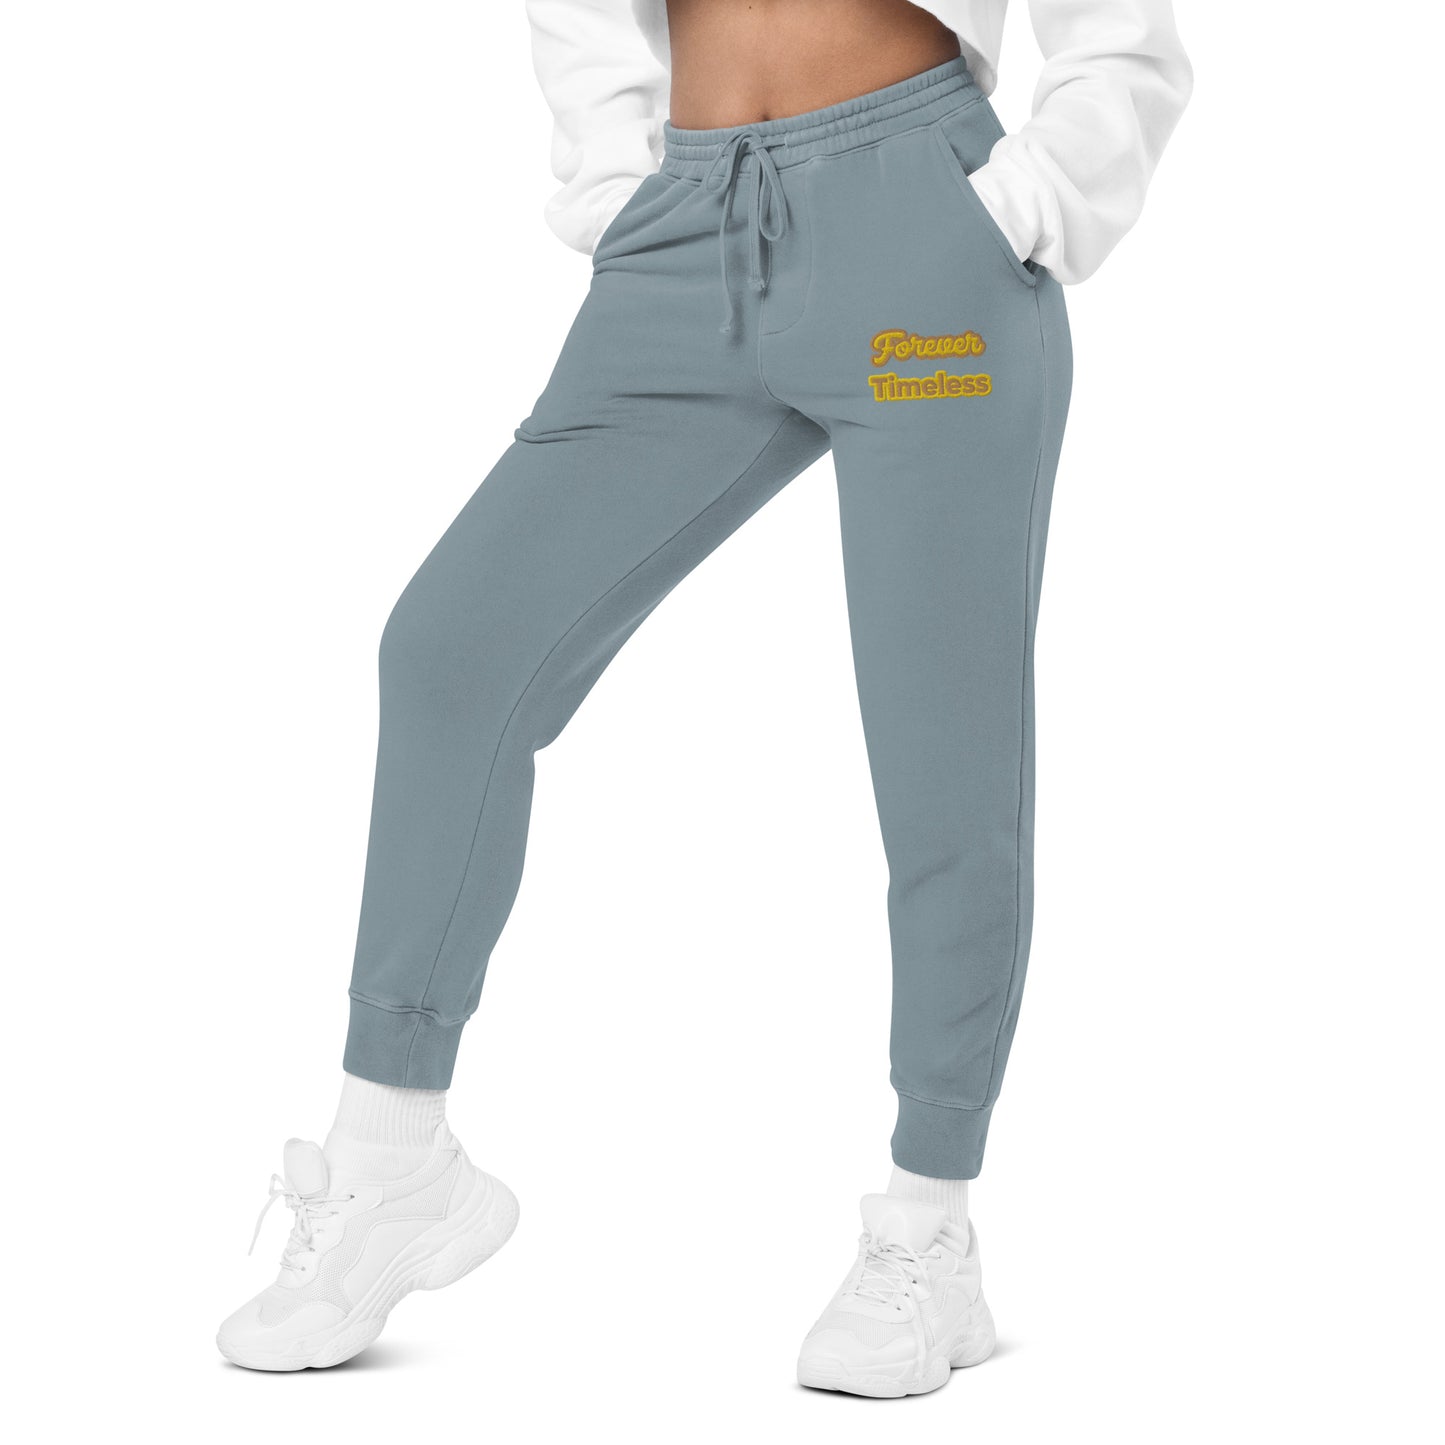 Woman's Timeless pigment-dyed sweatpants